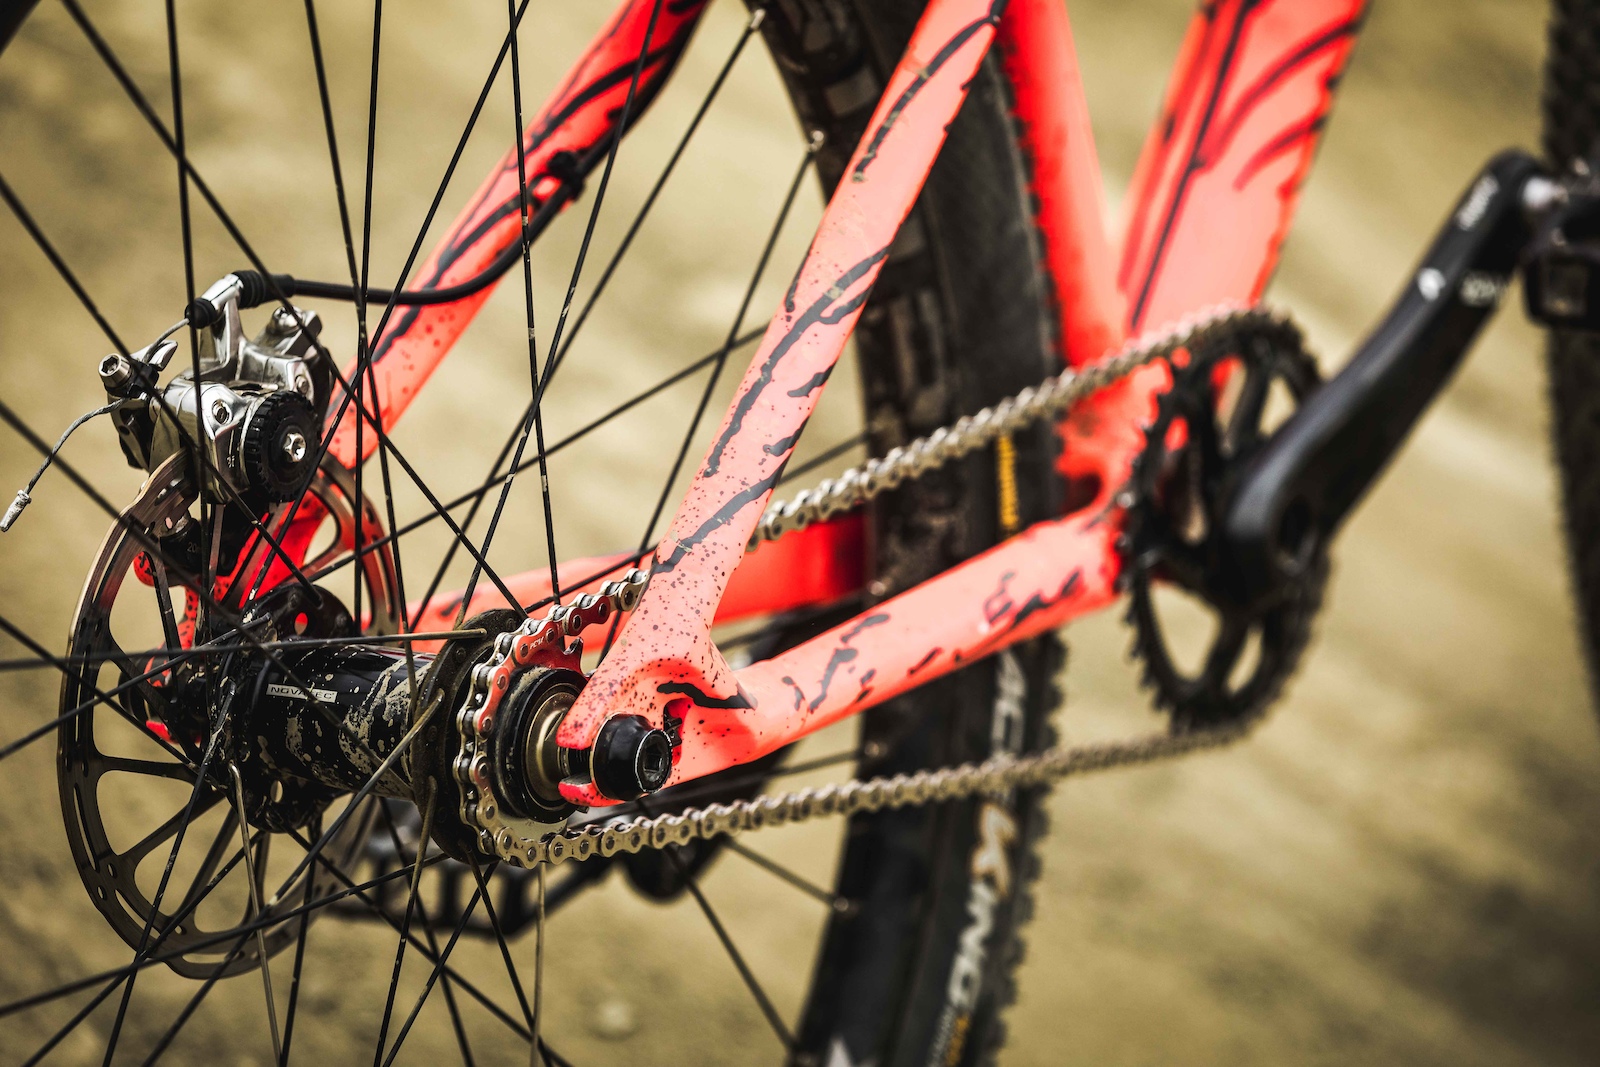 The components consist mostly of Sram along with a Novatec rim and hub set up.